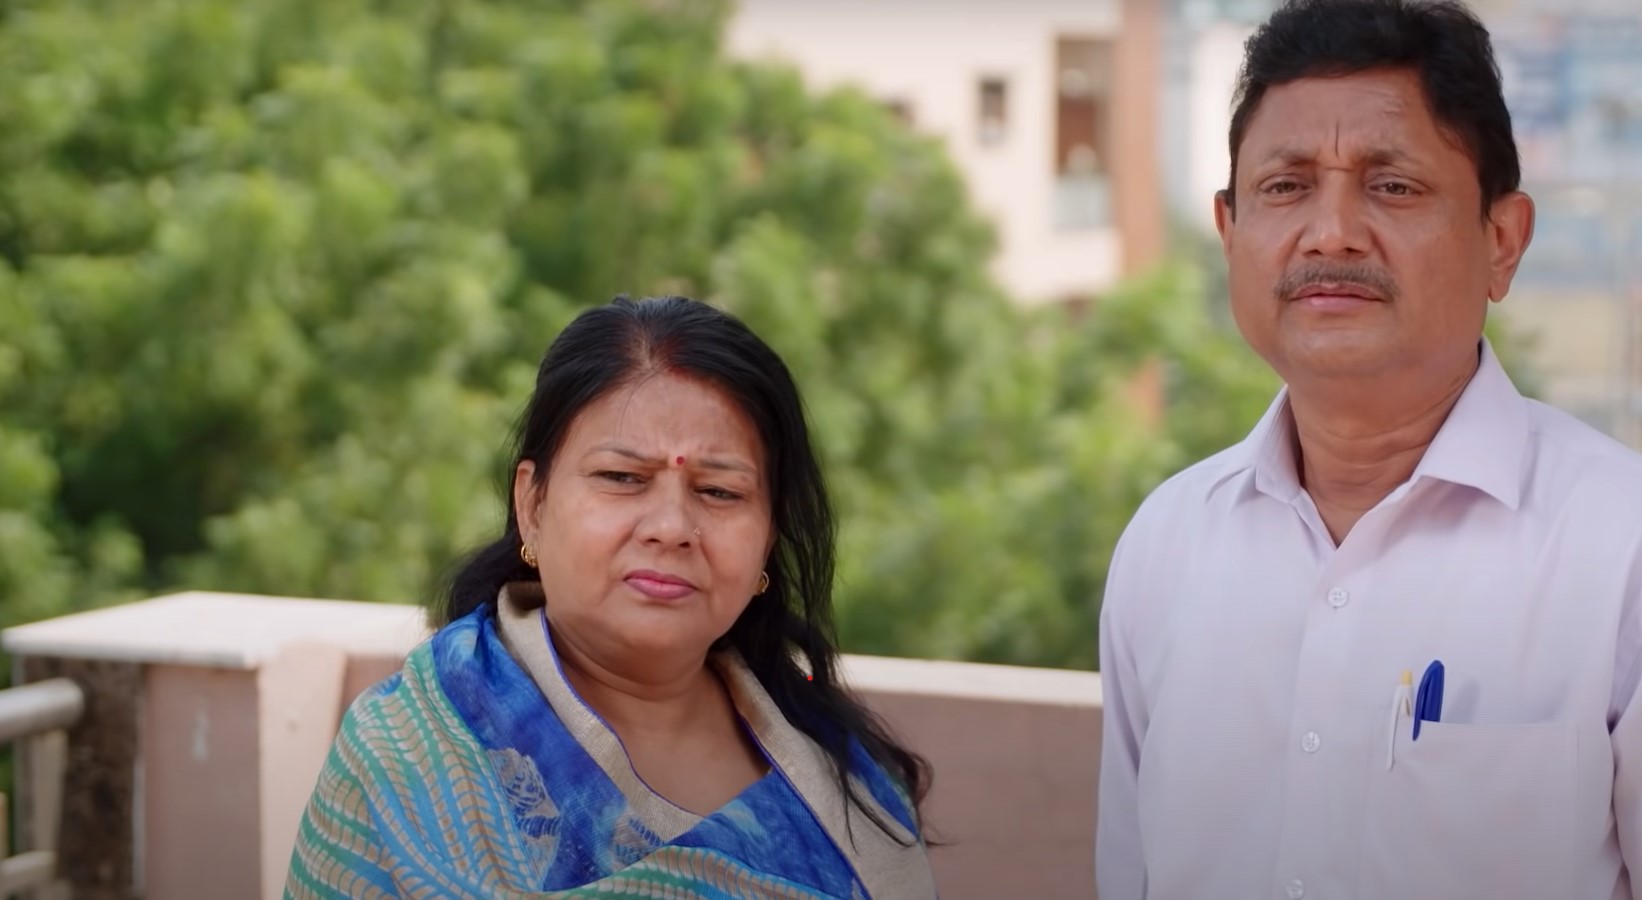 Sumit's parents on '90 Day Fiancé: The Other Way'